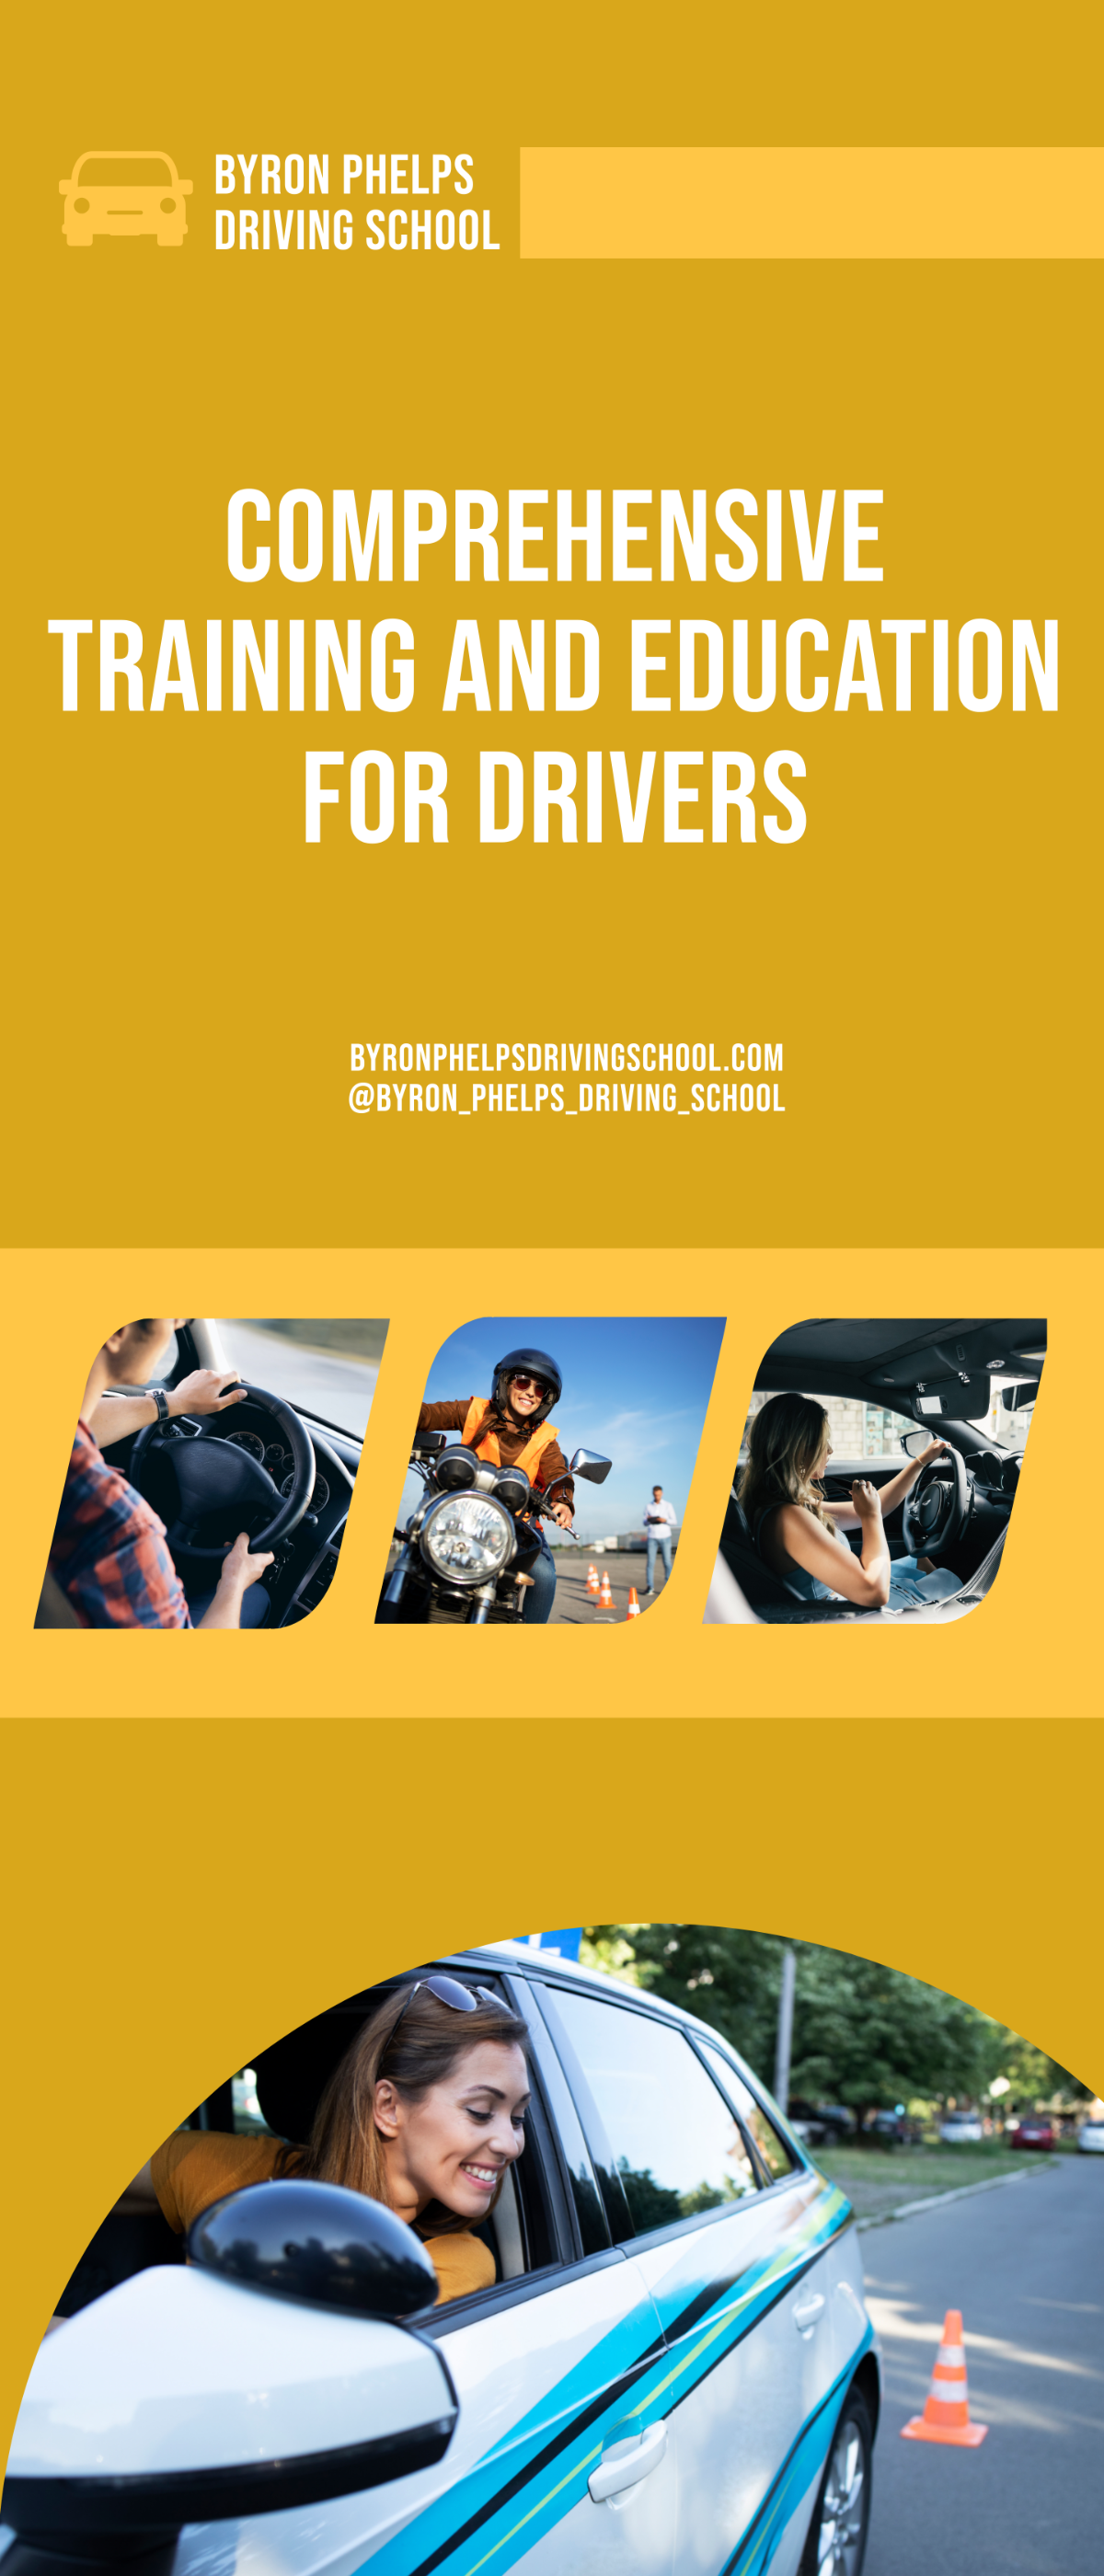 Free Driving School Roll Up Banner Template